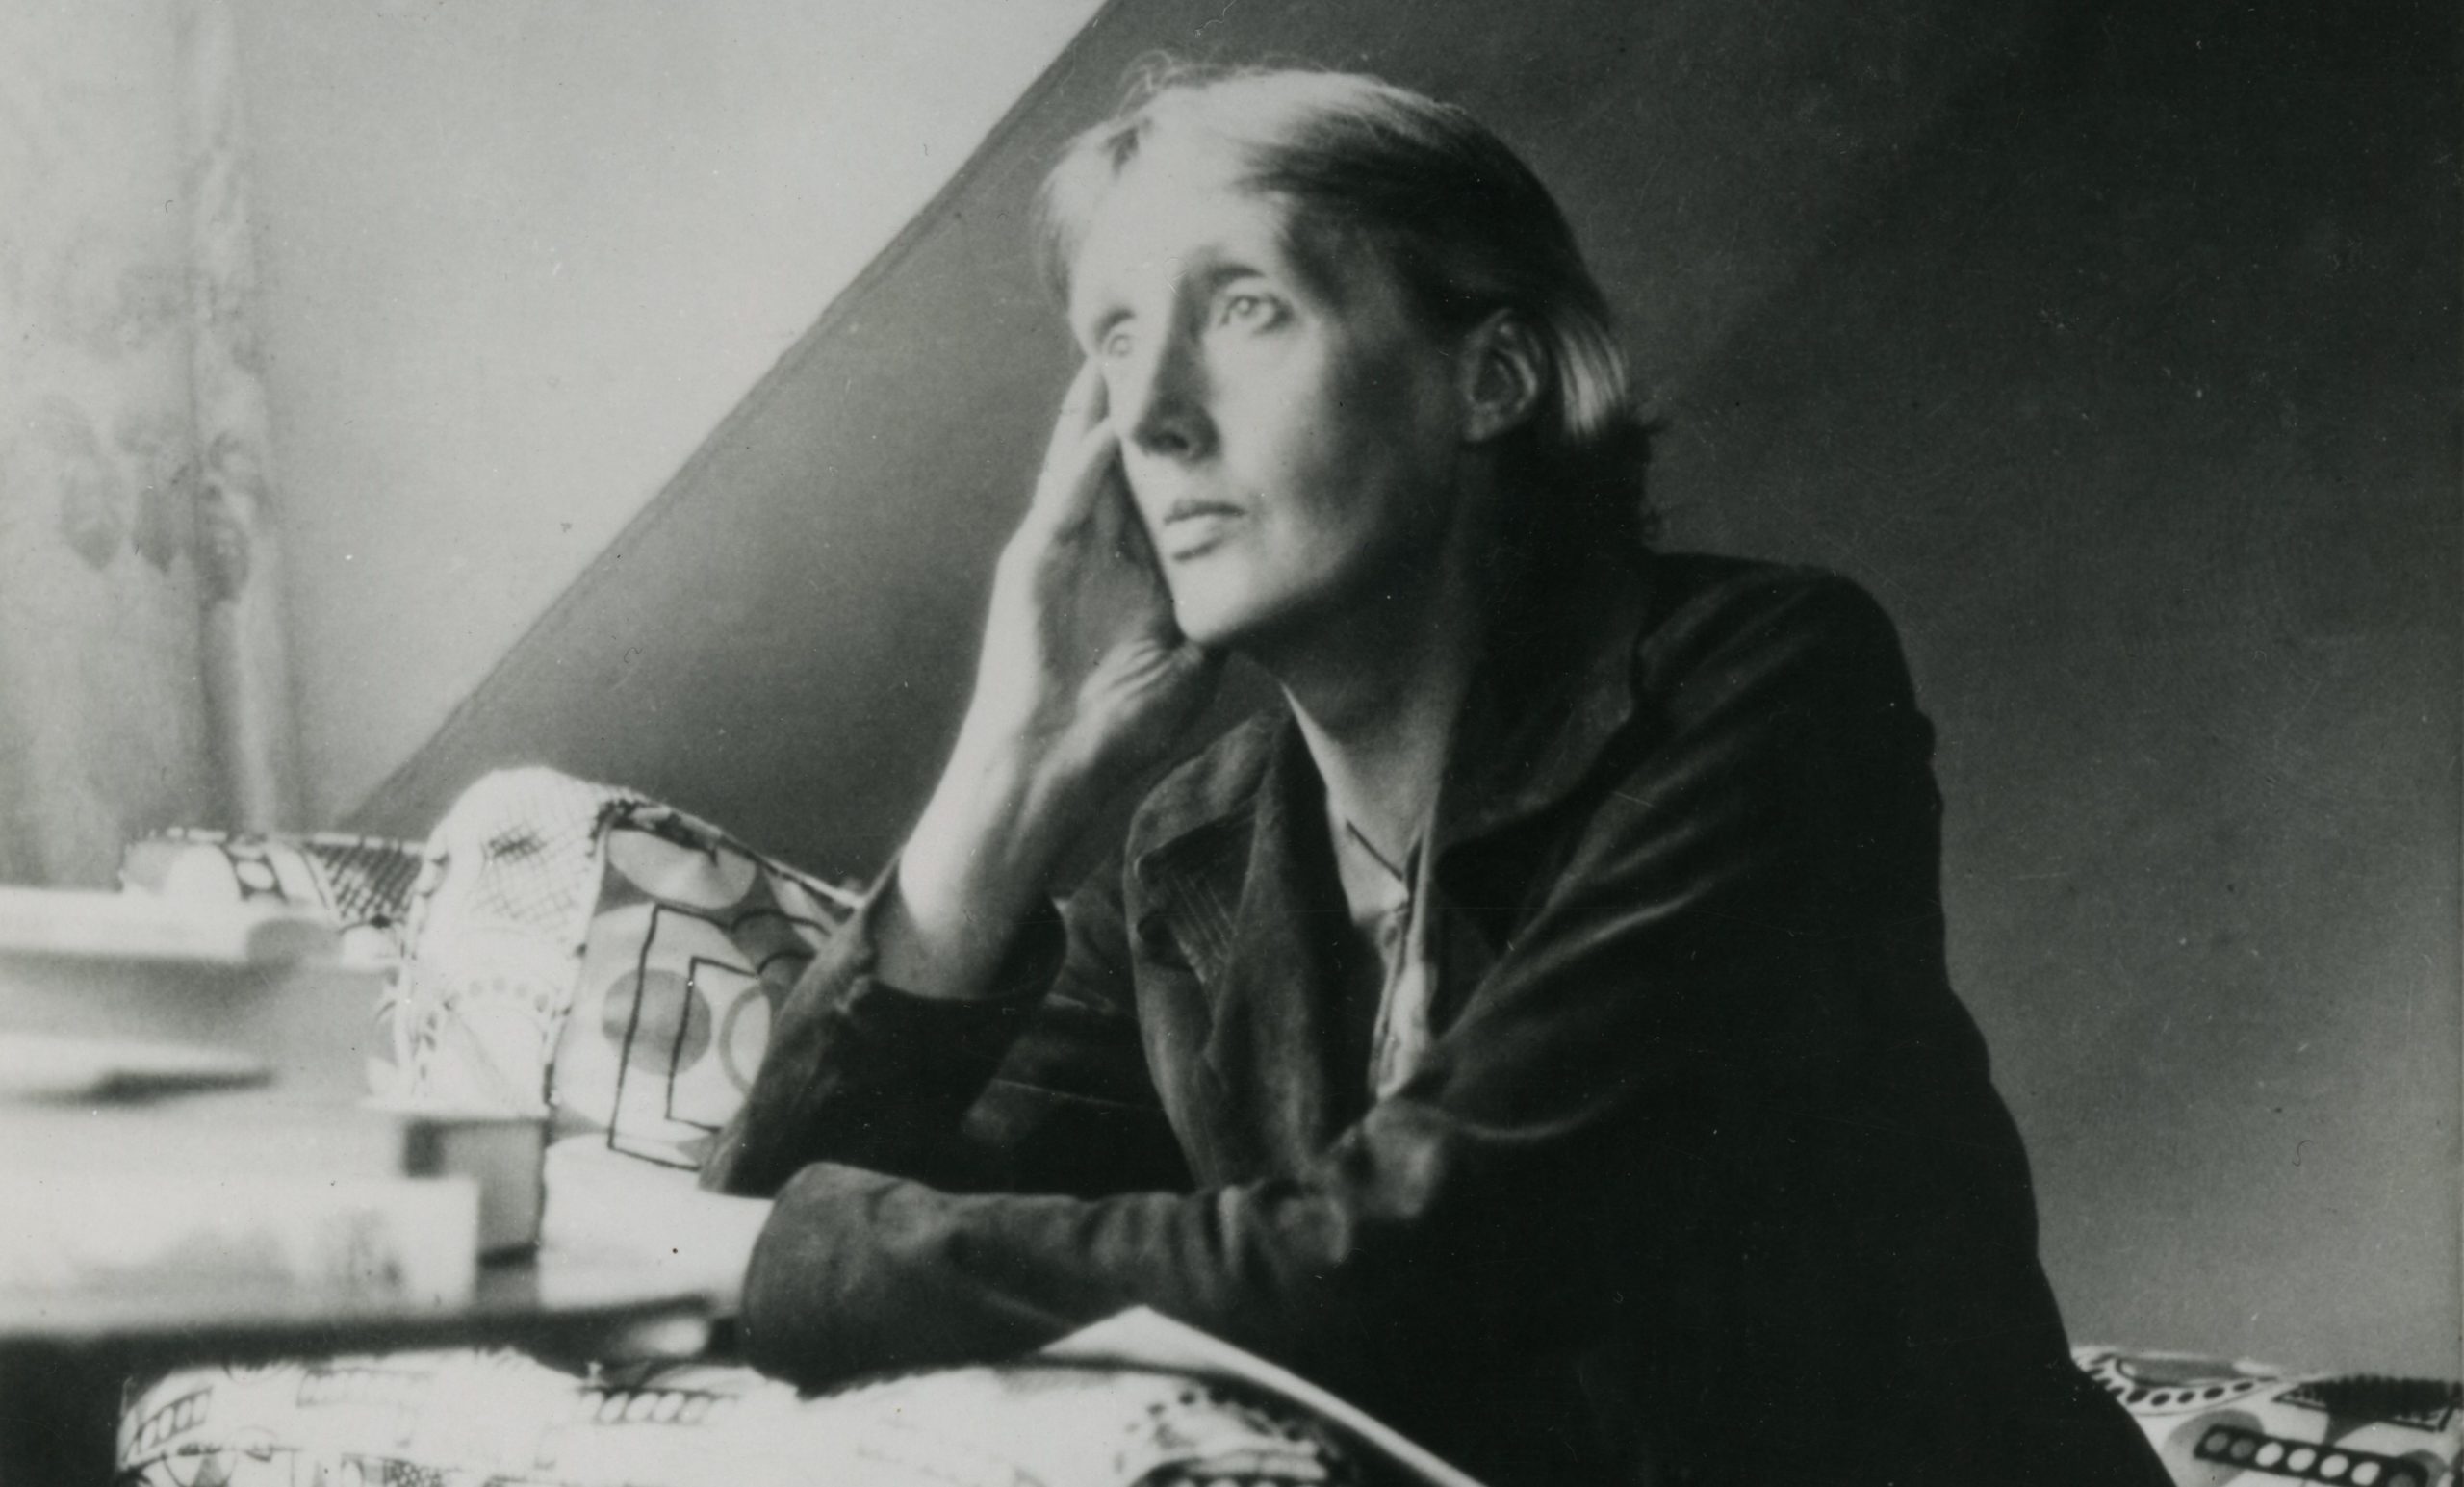 A black and white photograph of Virginia Woolf looking out of a window whilst sitting in an armchair upholstered in patterned fabric. She is resting her face on her right hand as she looks. Her other arm is folded across in front of her. She has he short hairstyle tucked behind her ears.